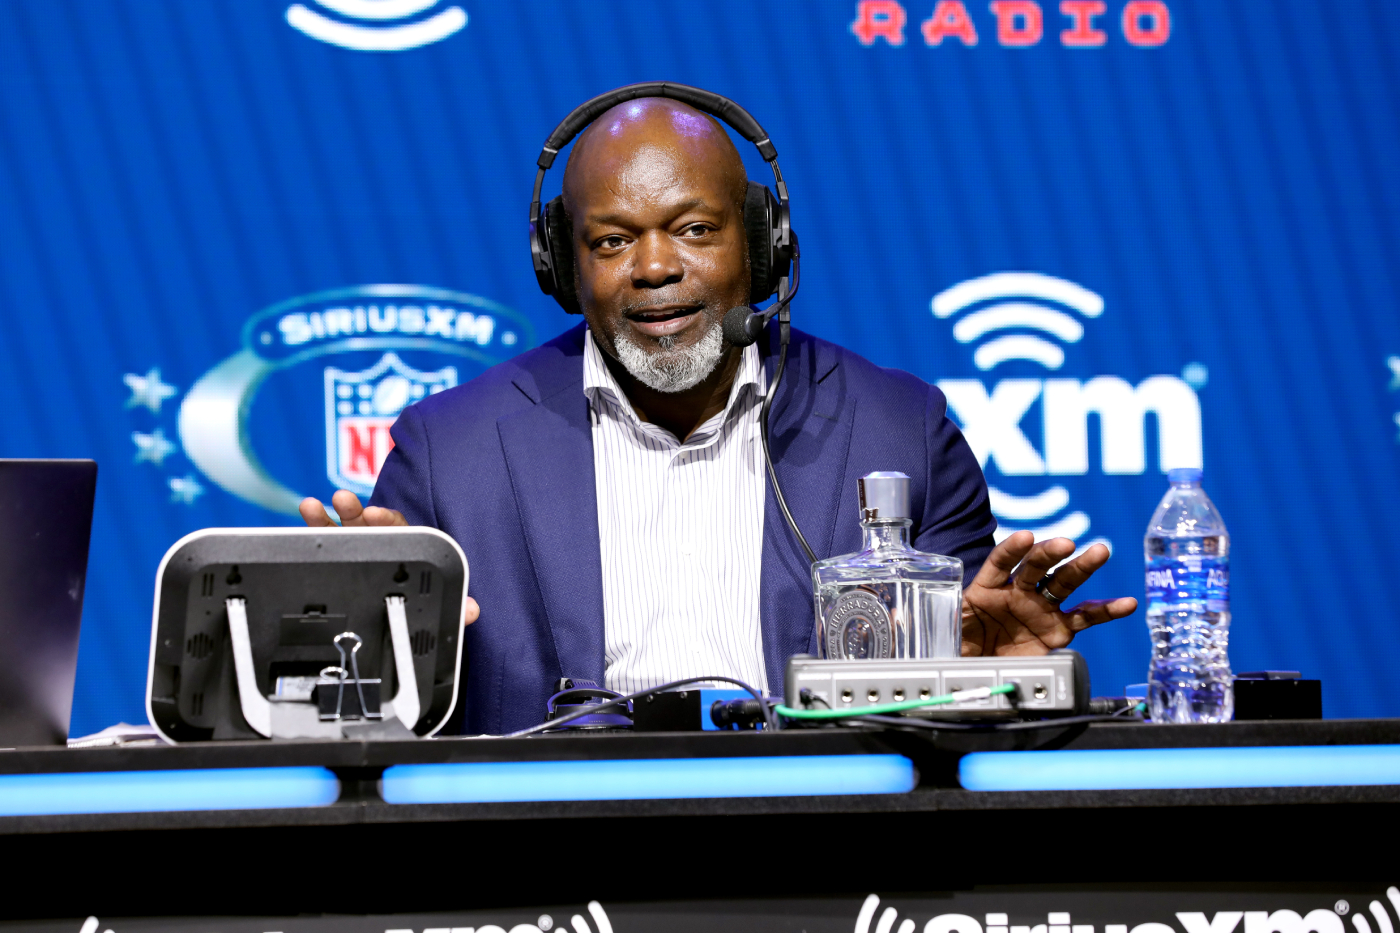 Emmitt Smith Is Forgetting About the Cowboys’ Struggles by Getting Involved in NASCAR